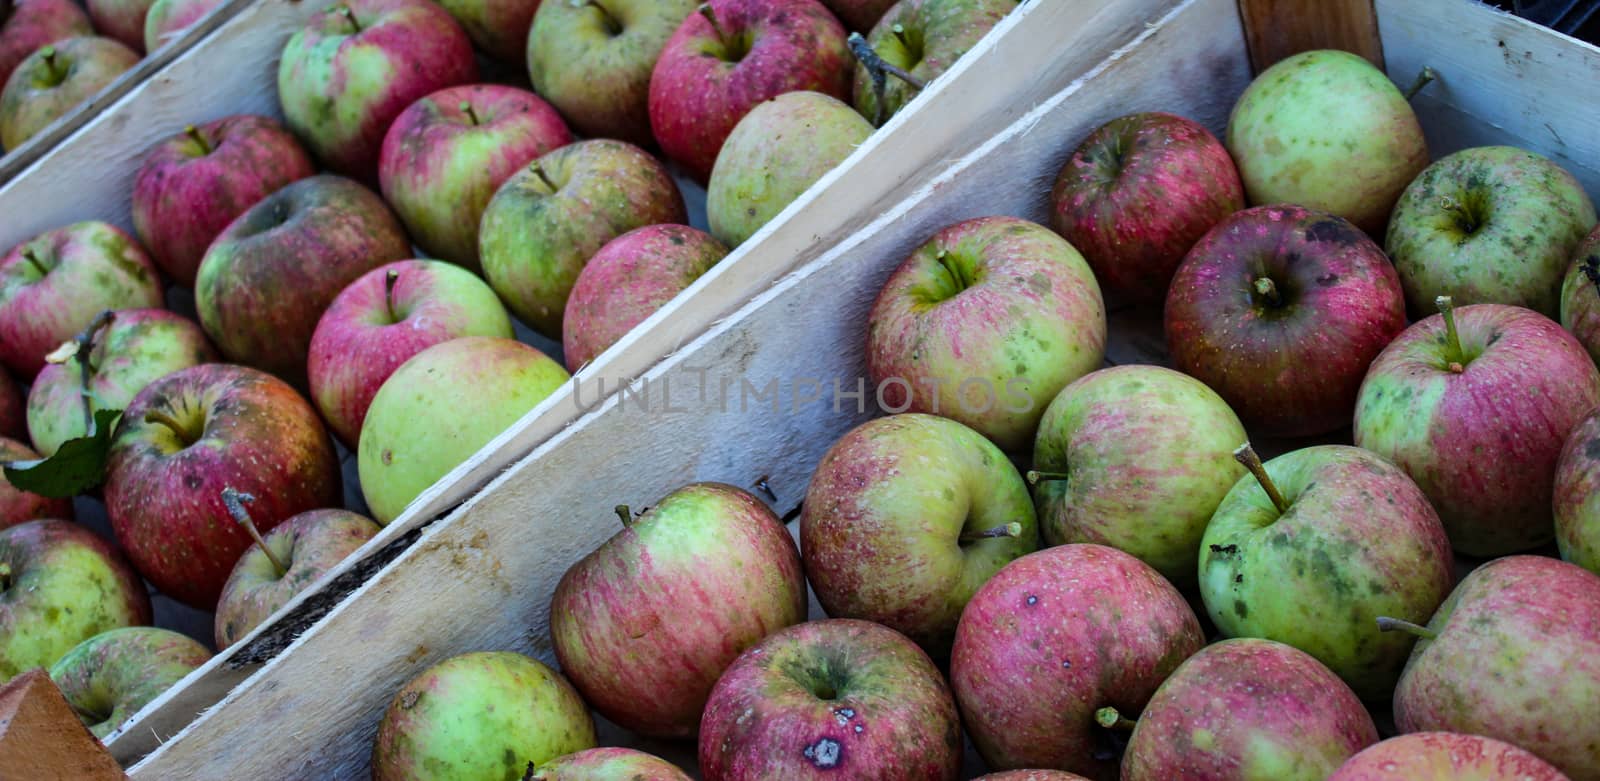 Banner. Picked apples in wooden crates ready for sale. Organic apples. by mahirrov